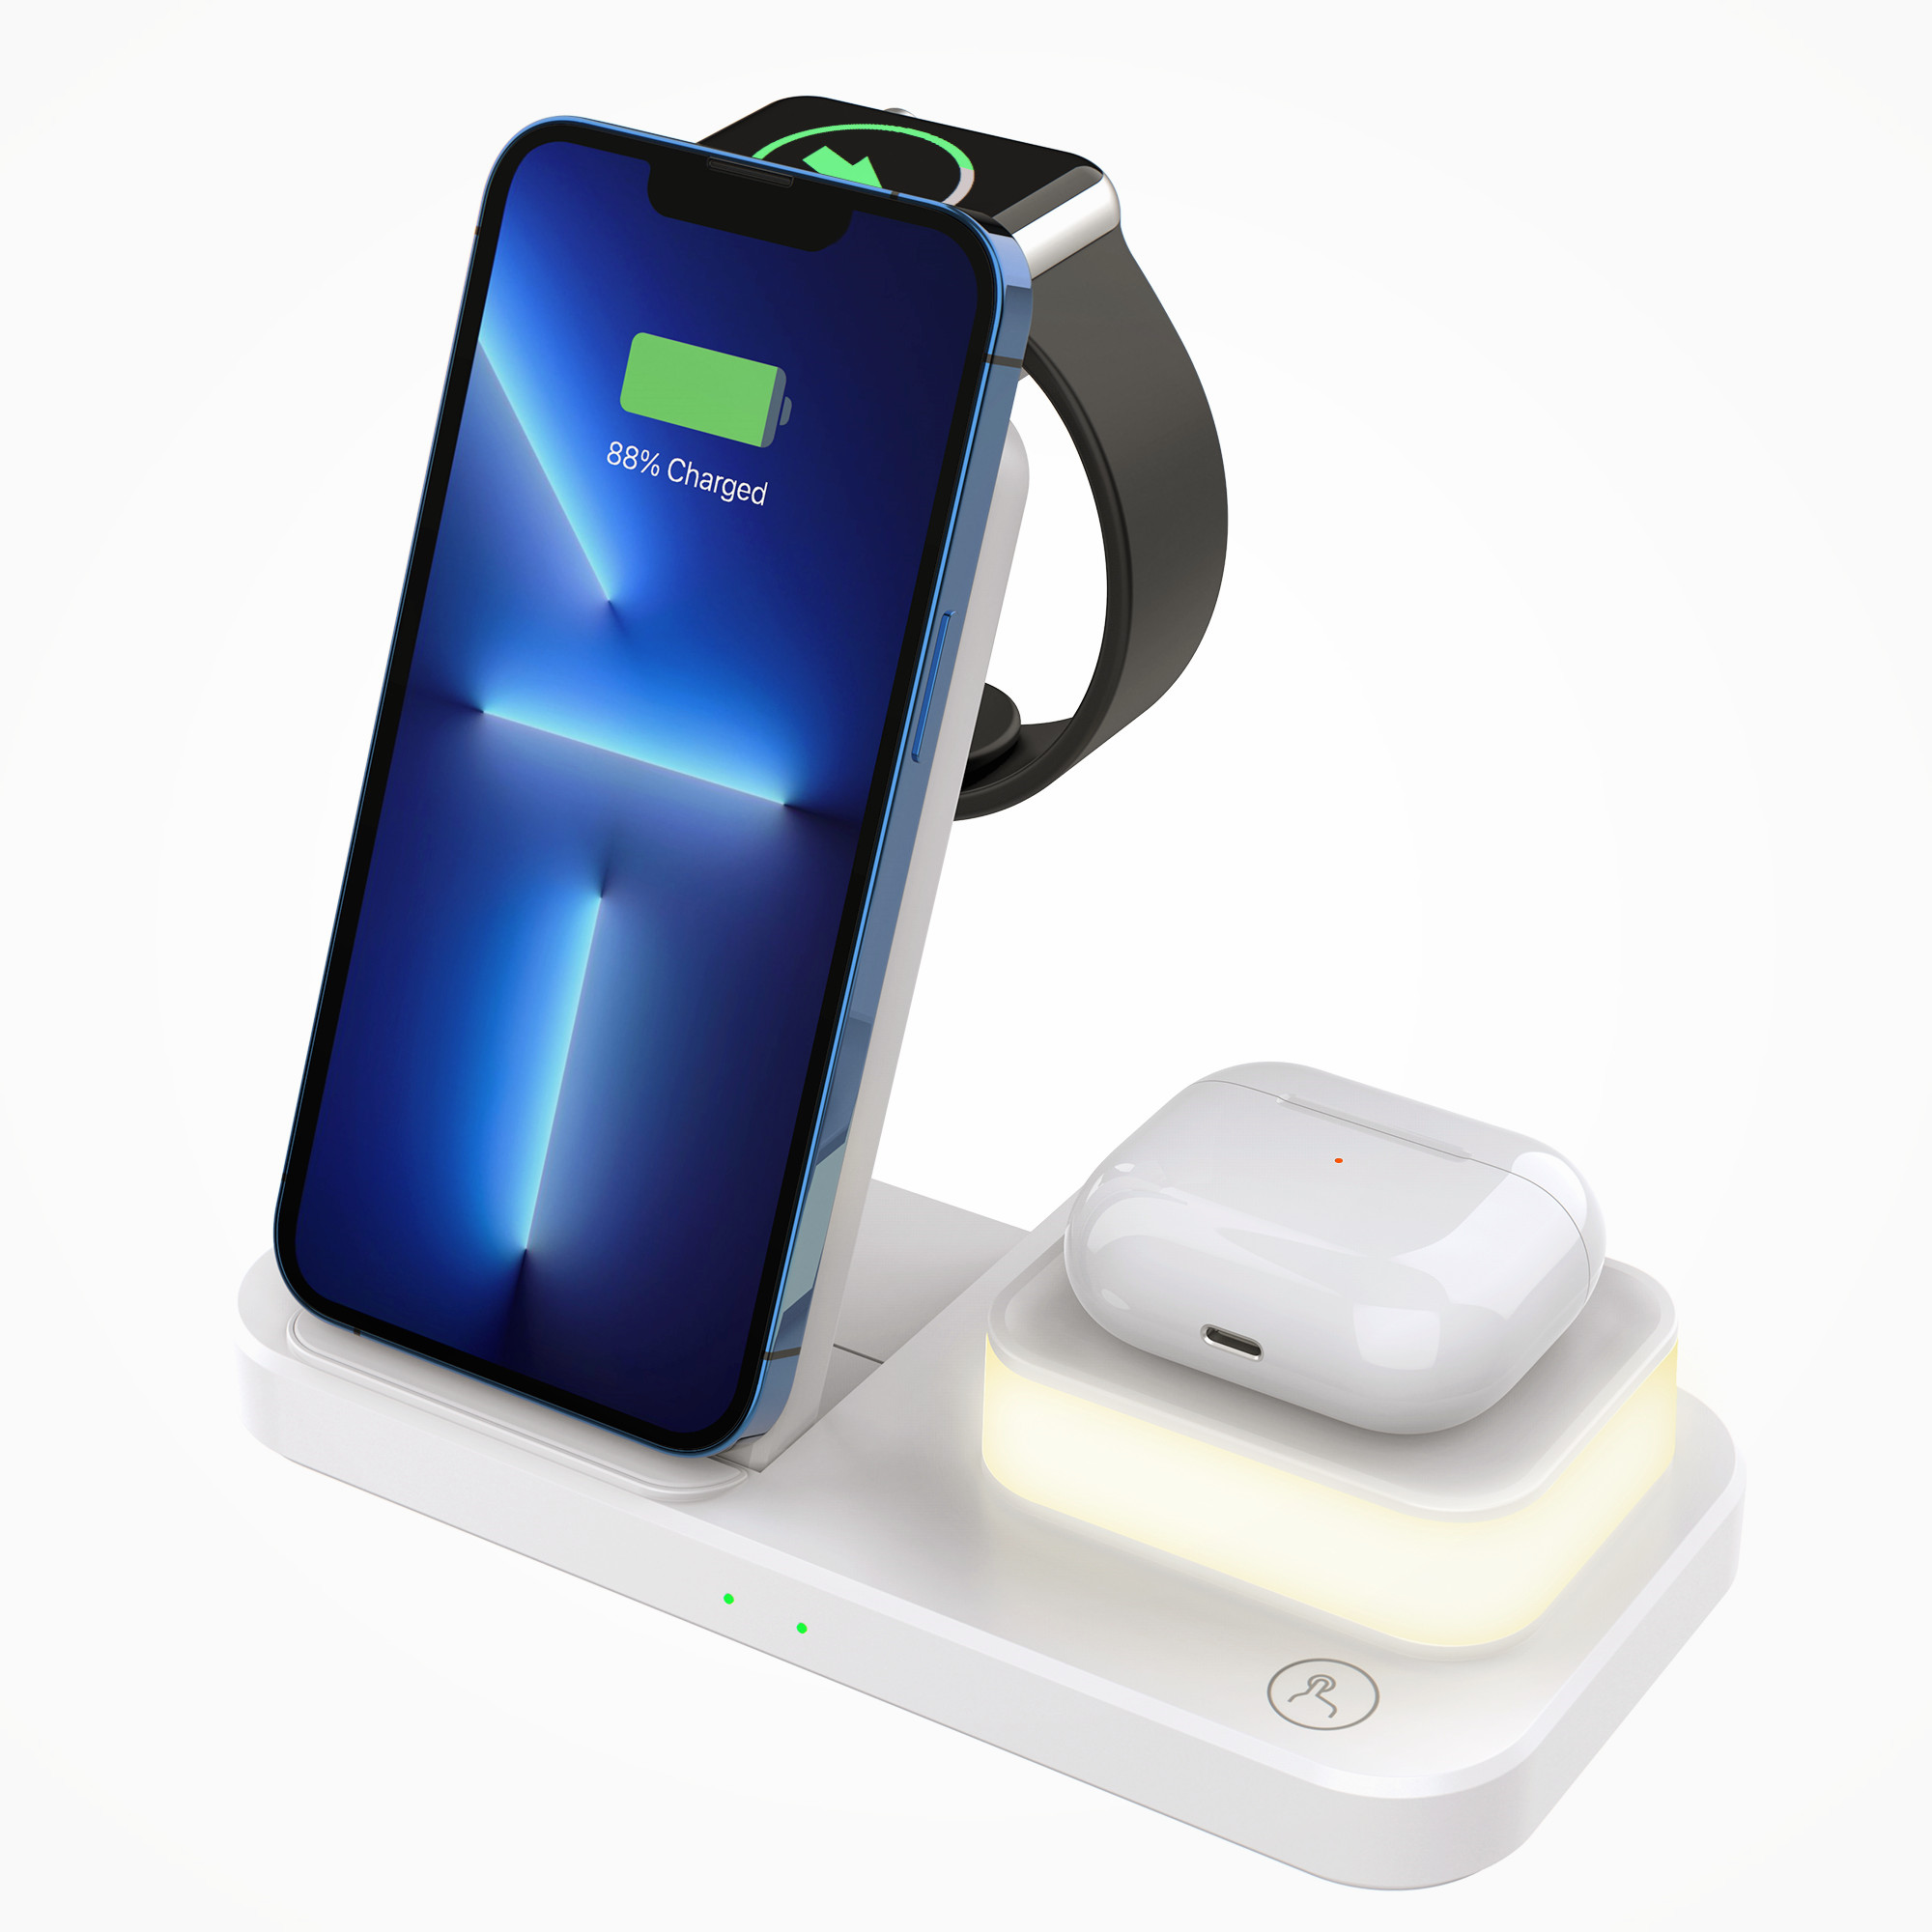 4 em 1 qi qi Fast Wireless Charger Stand com lâmpada noturna para iPhone 13 12 11 x 8 Apple Watch 7 AirPods Pro Light Light Dobrable Dock Station Samsung S21 S20